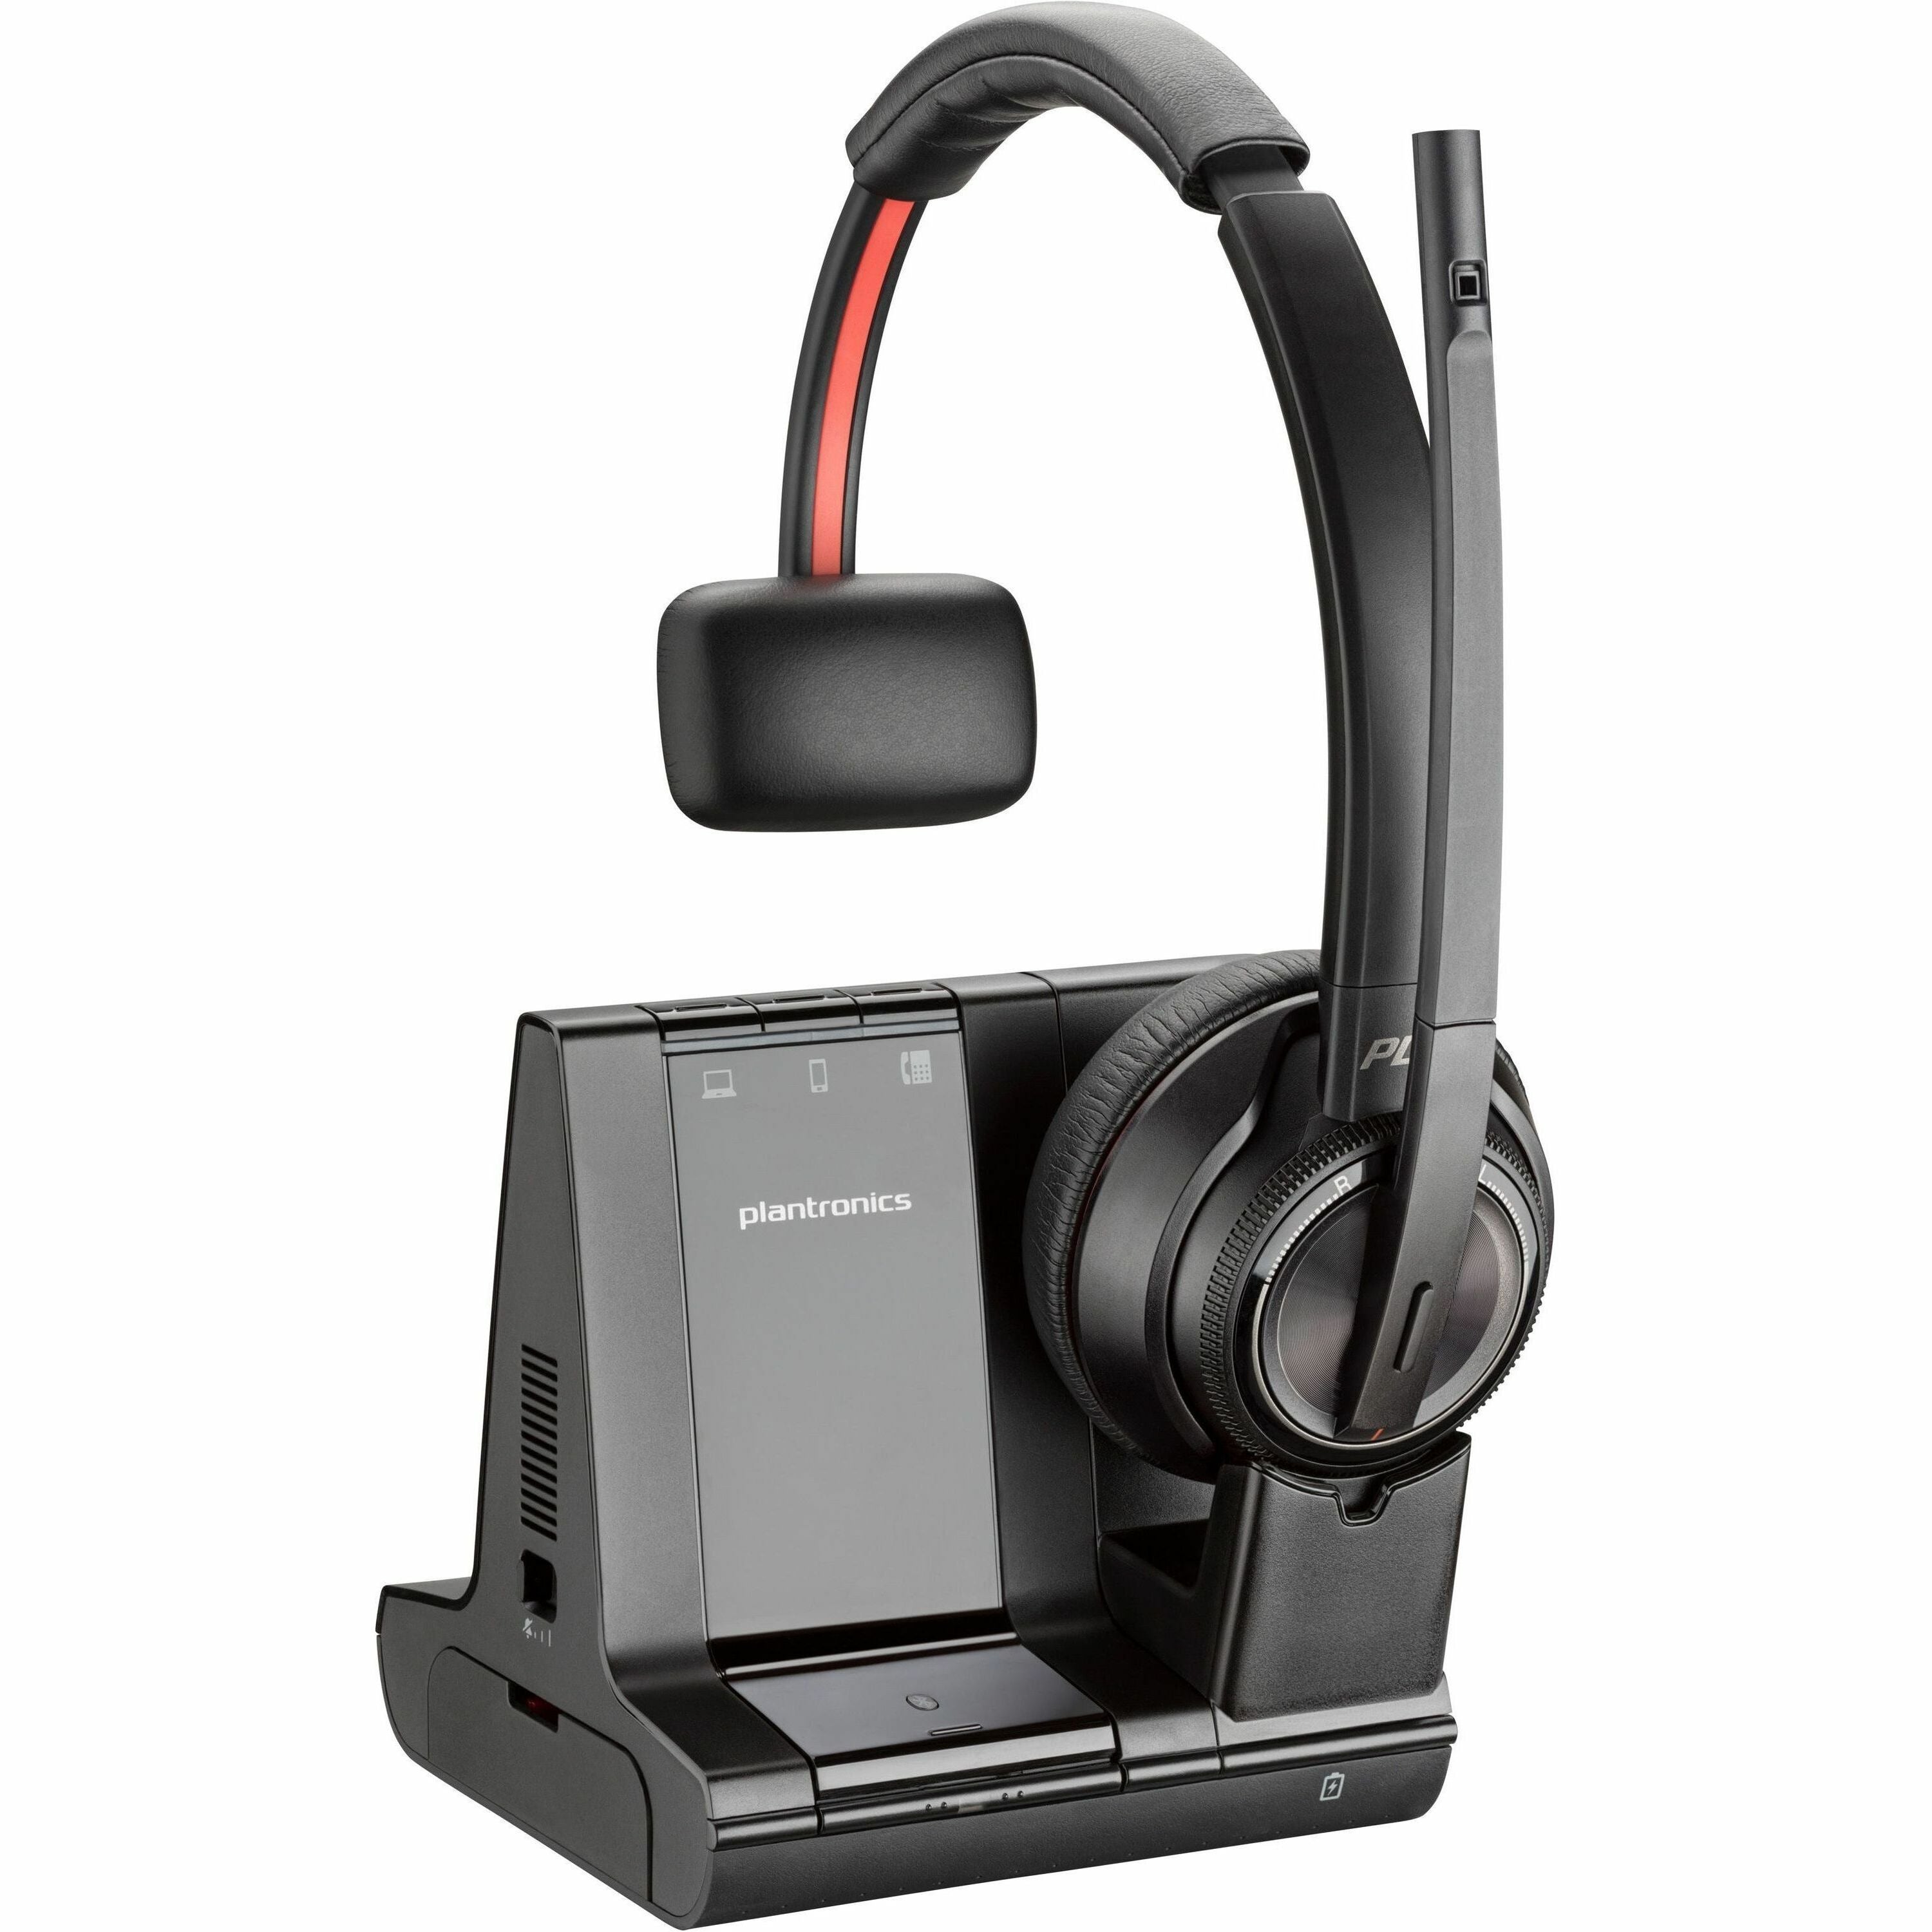 poly-savi-8210-single-ear-wireless-headset-mono-wireless-bluetooth-dect-590-ft-32-ohm-20-hz-20-khz-on-ear-over-the-head-monaural-ear-cup-noise-cancelling-microphone-black_hew7s445aa - 1